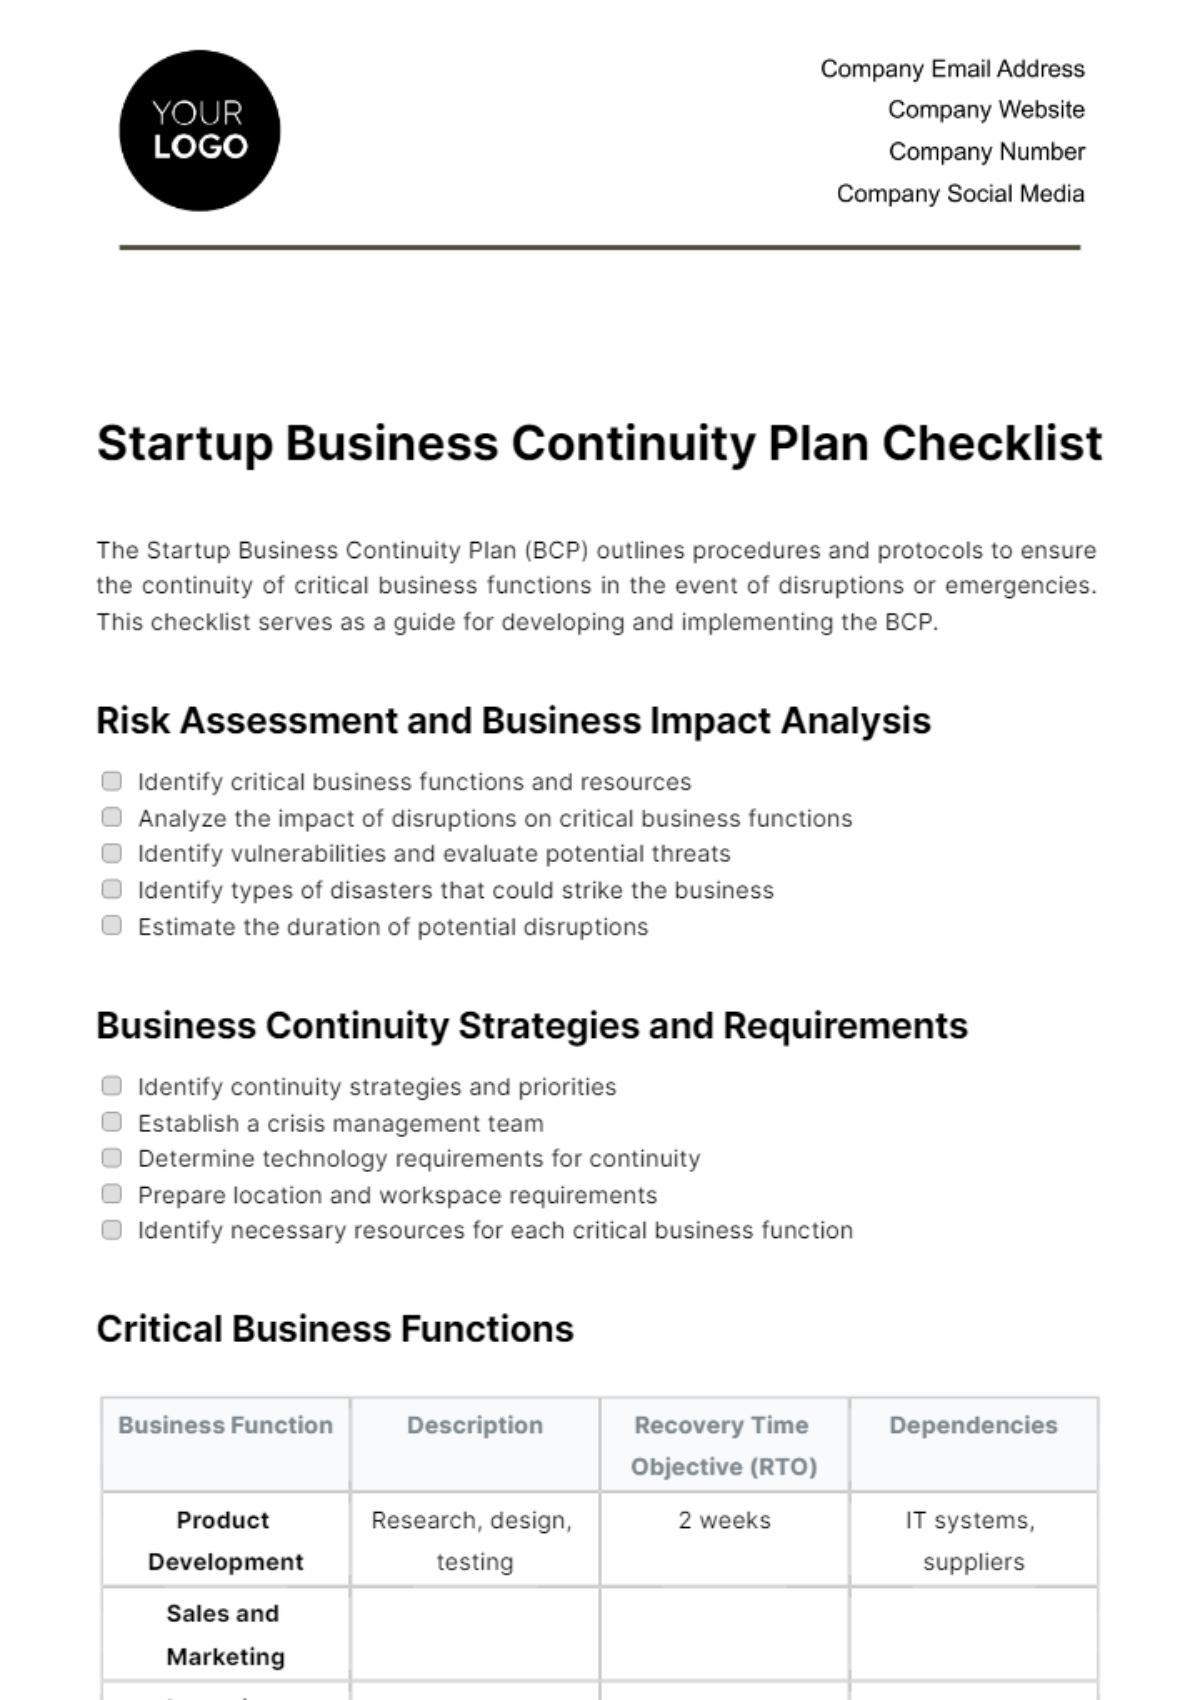 Startup Business Continuity Plan Checklist Template